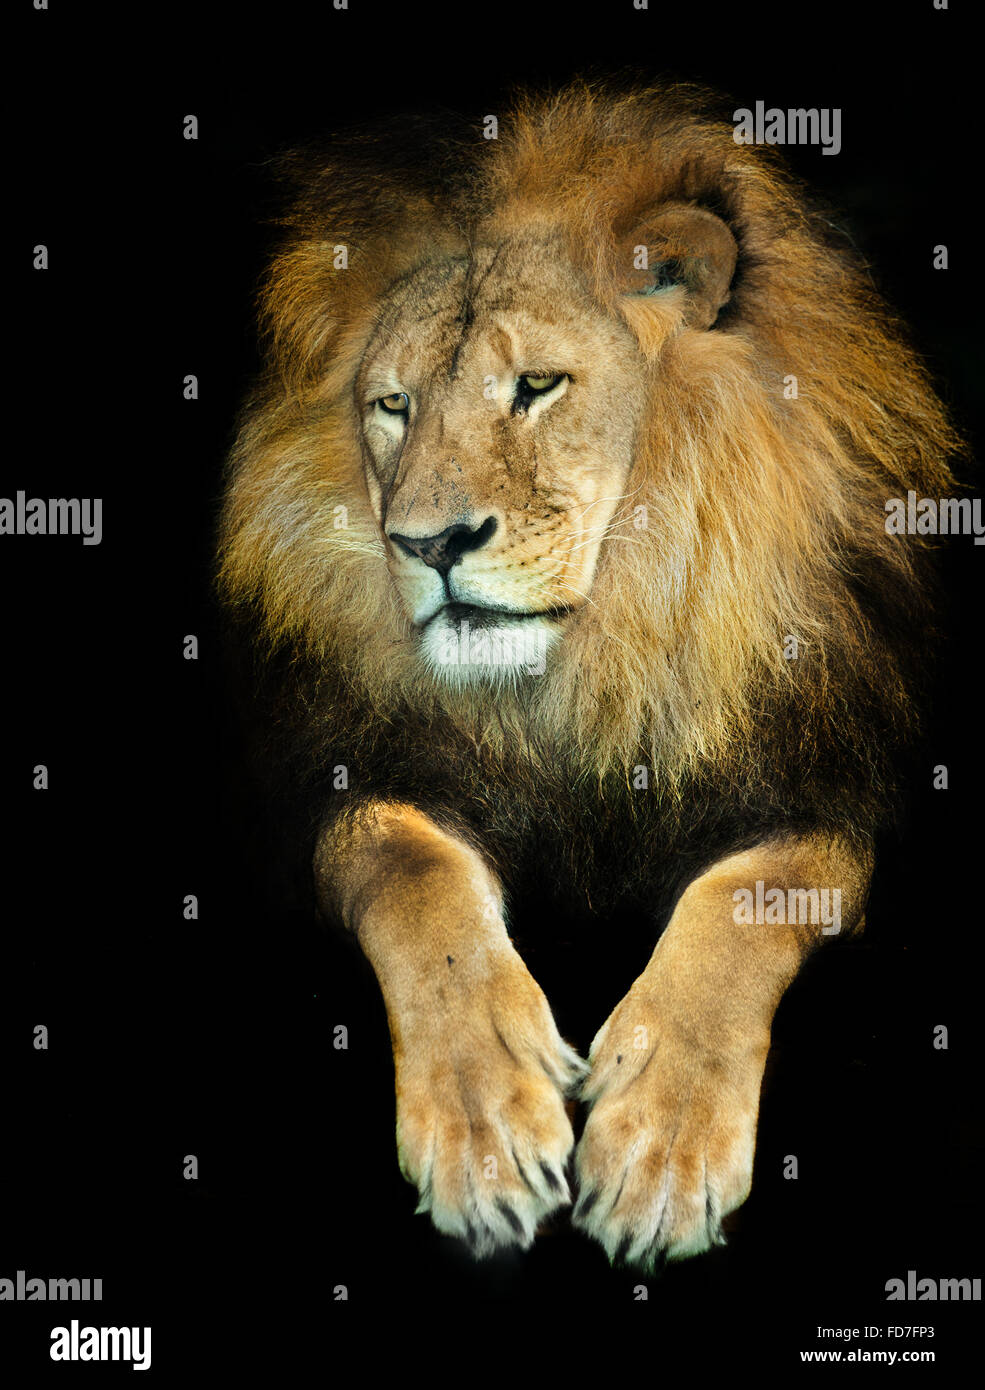 lion Has a thoughtful expression. Stock Photo